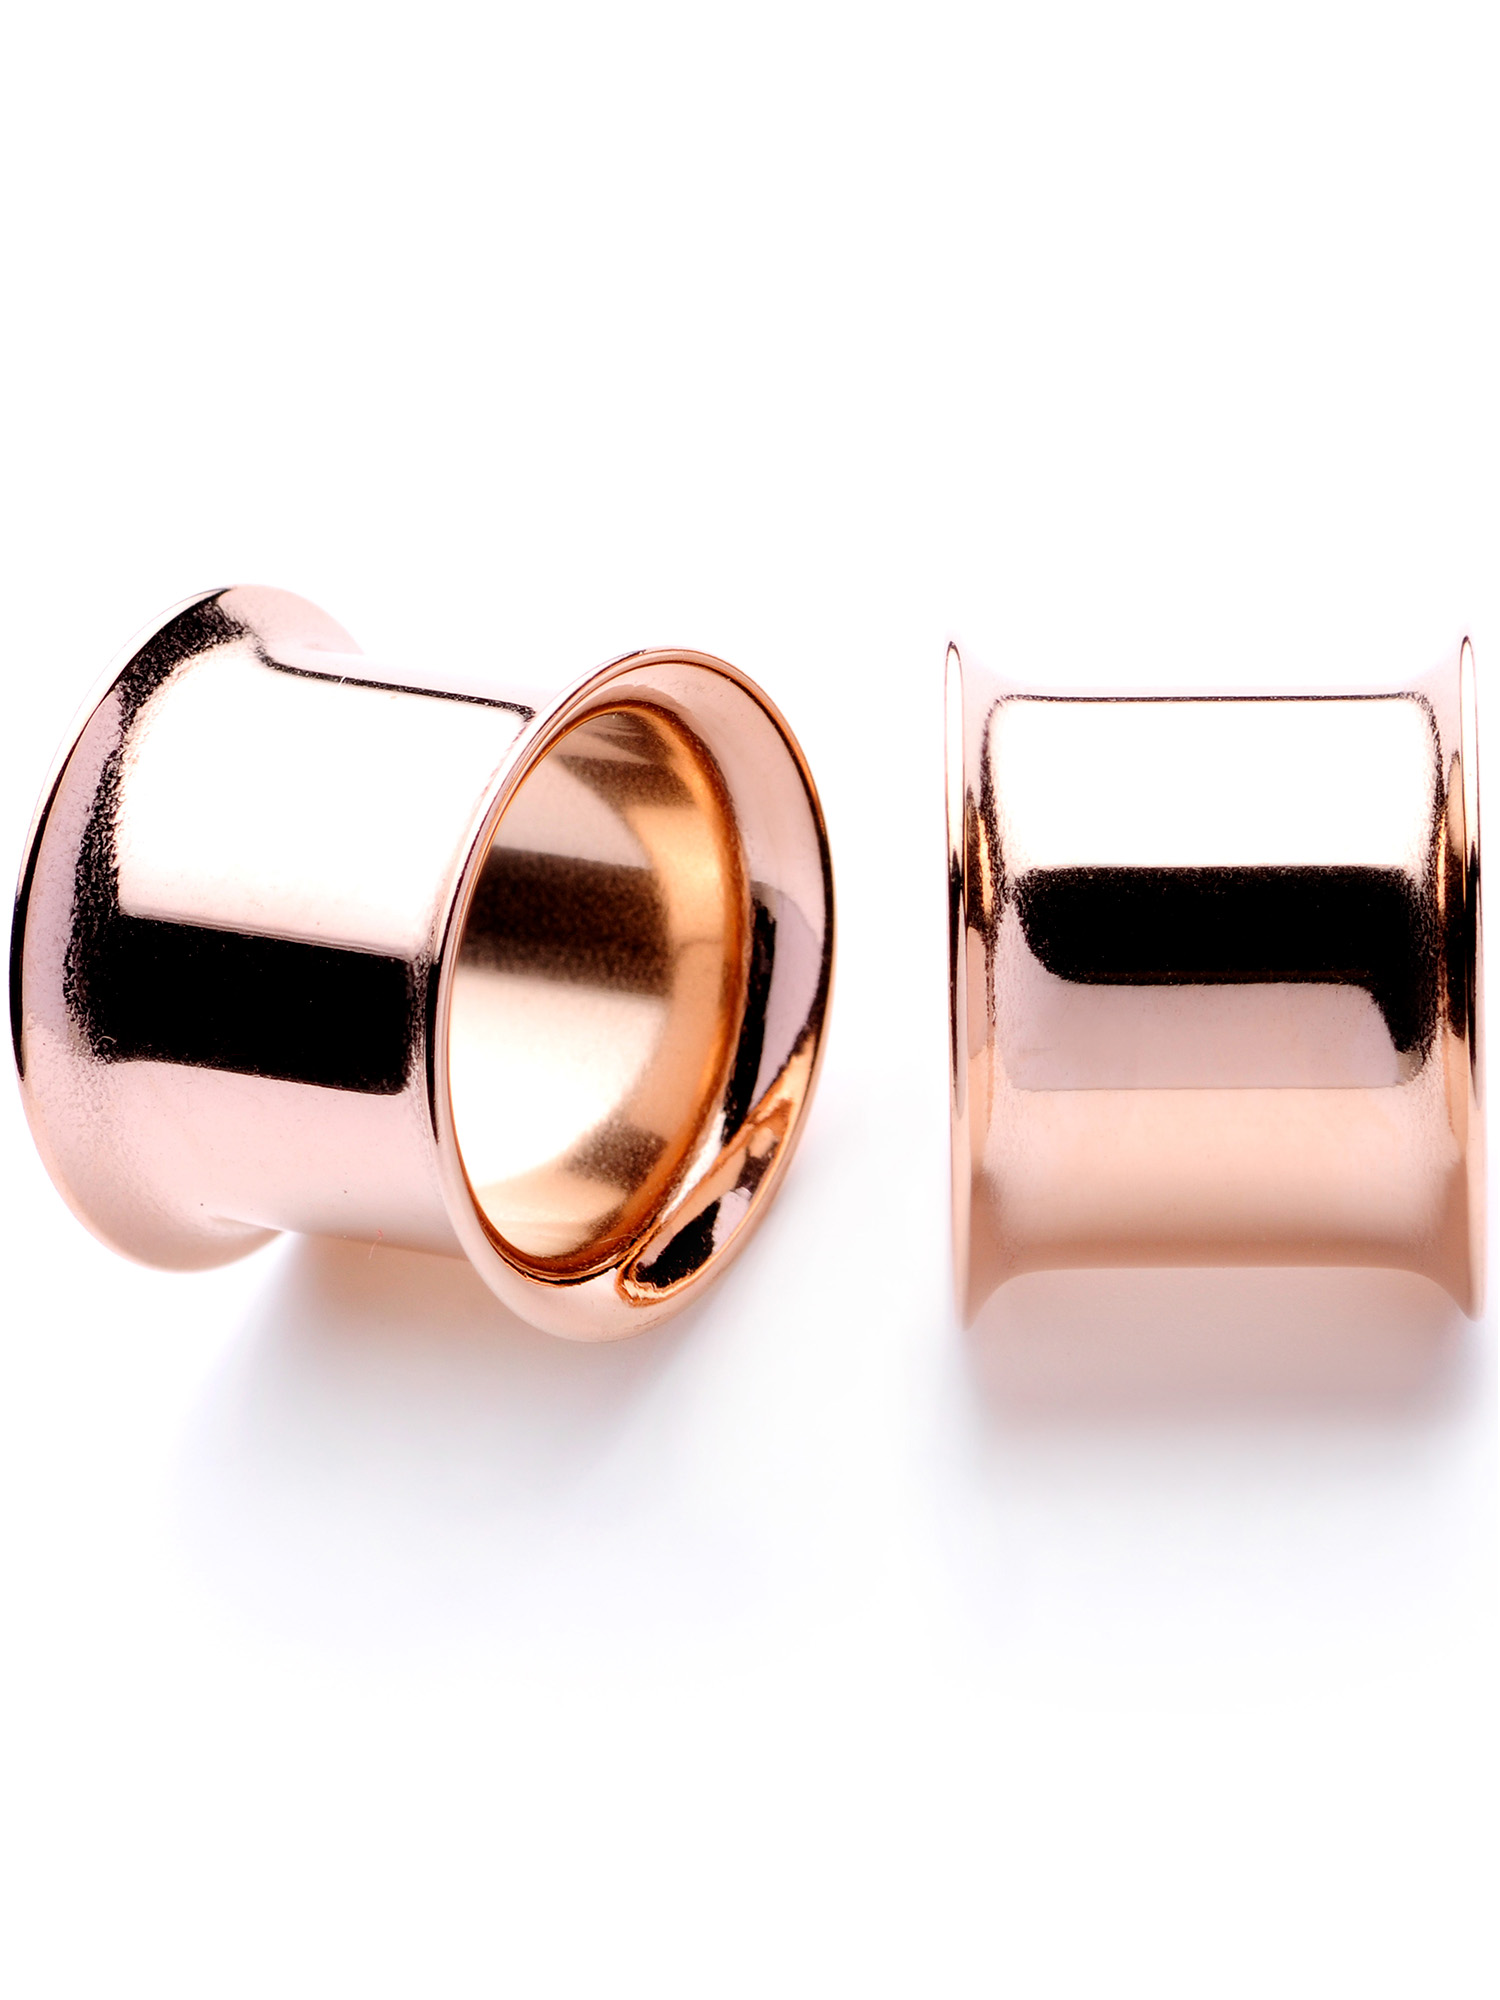 Body Candy 2Pc Anodized Steel 11mm Double Flare Tunnel Plug Ear Plug Gauges Set of 2 7/16" - image 1 of 3